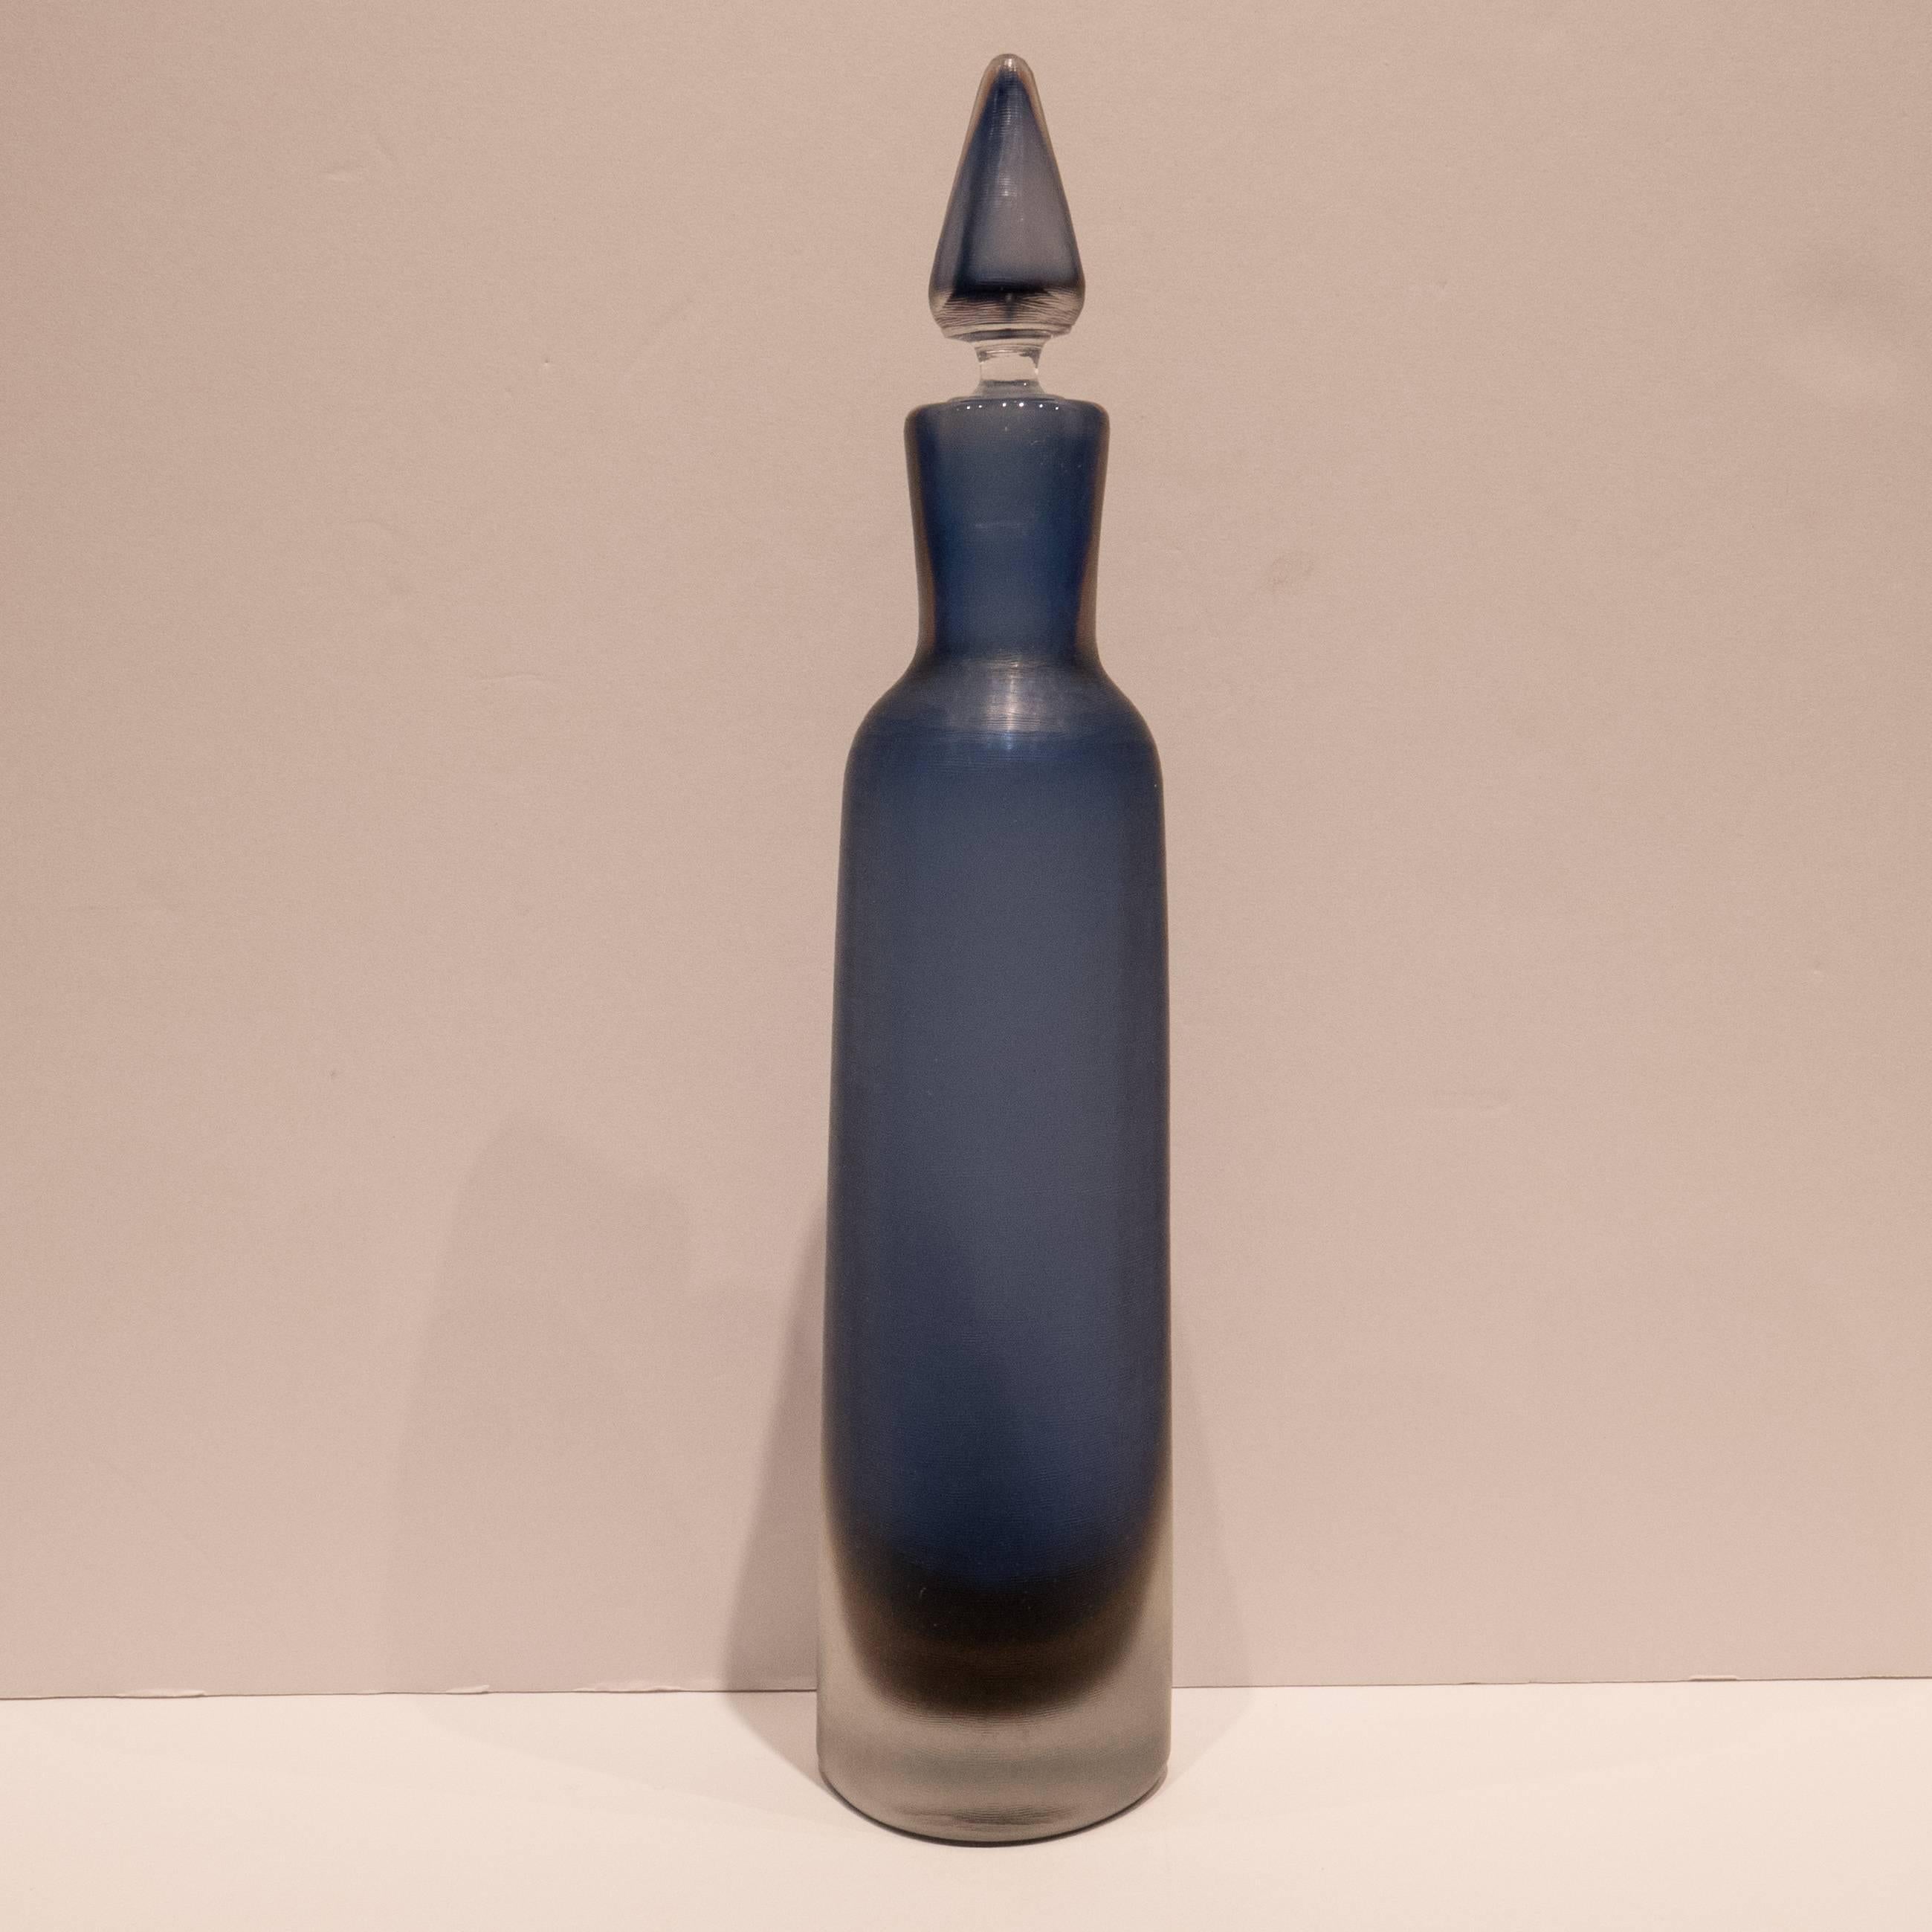 Triangular-shaped Sommerso glass decanter/bottle and stopper with inciso technique surface; blue and purple color in clear matrix. A 1956 Paolo Venini design, and a late 1950s Venini production with the three-line acid signature